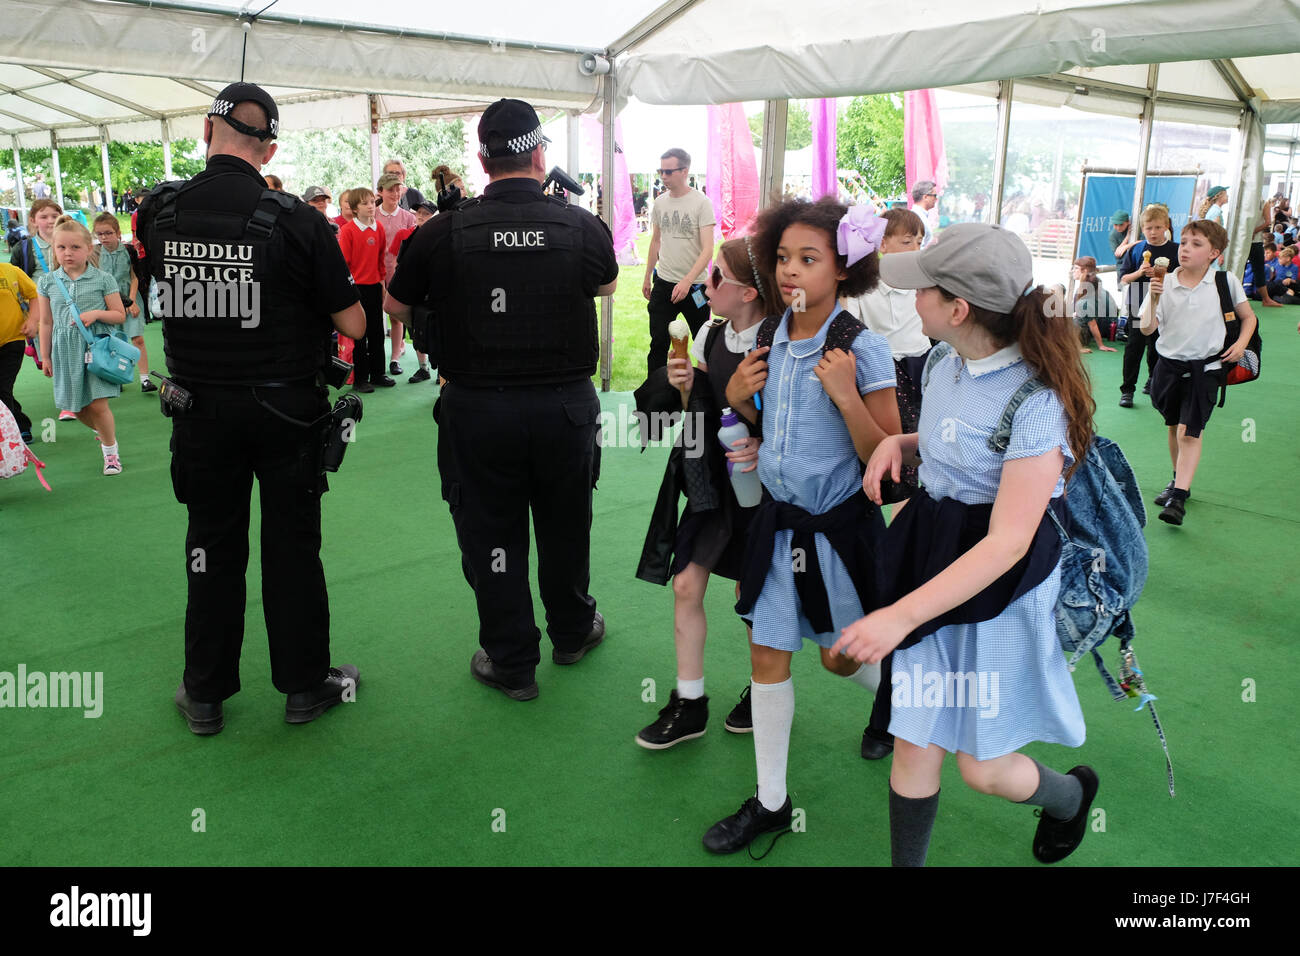 Hay Festival 2017 - Hay on Wye, Wales, UK - May 2017 - Armed police officers patrol the  opening day of this years Hay Festival which celebrates its 30th anniversary in 2017. Over 3,000 primary school children will attend Day 1 of the literary festival. Credit: Steven May/Alamy Live News Stock Photo